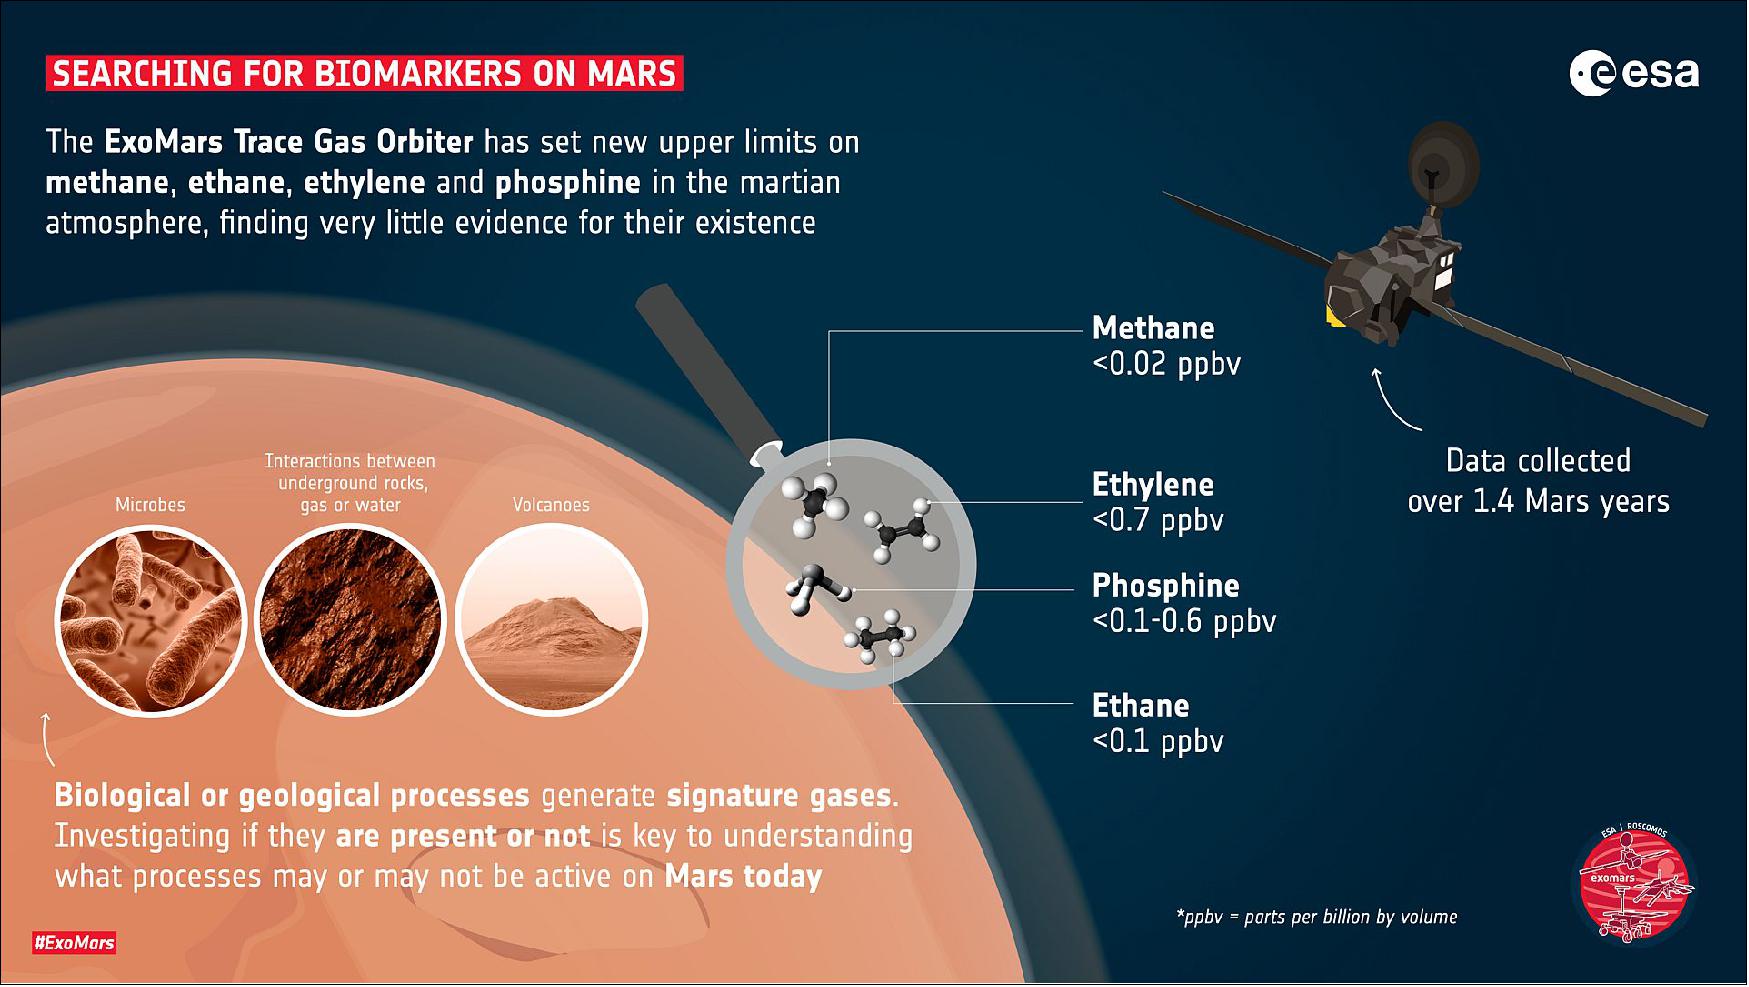 Figure 24: Searching for biomarkers on Mars. The ExoMars Trace Gas Orbiter has set new upper limits on methane, ethane, ethylene and phosphine in the martian atmosphere, finding very little evidence for their existence. The gases are often associated with biological or geological processes, so understanding if they are present or not on another planet is key to understanding what processes may or may not be active on Mars today (image credit: ESA)